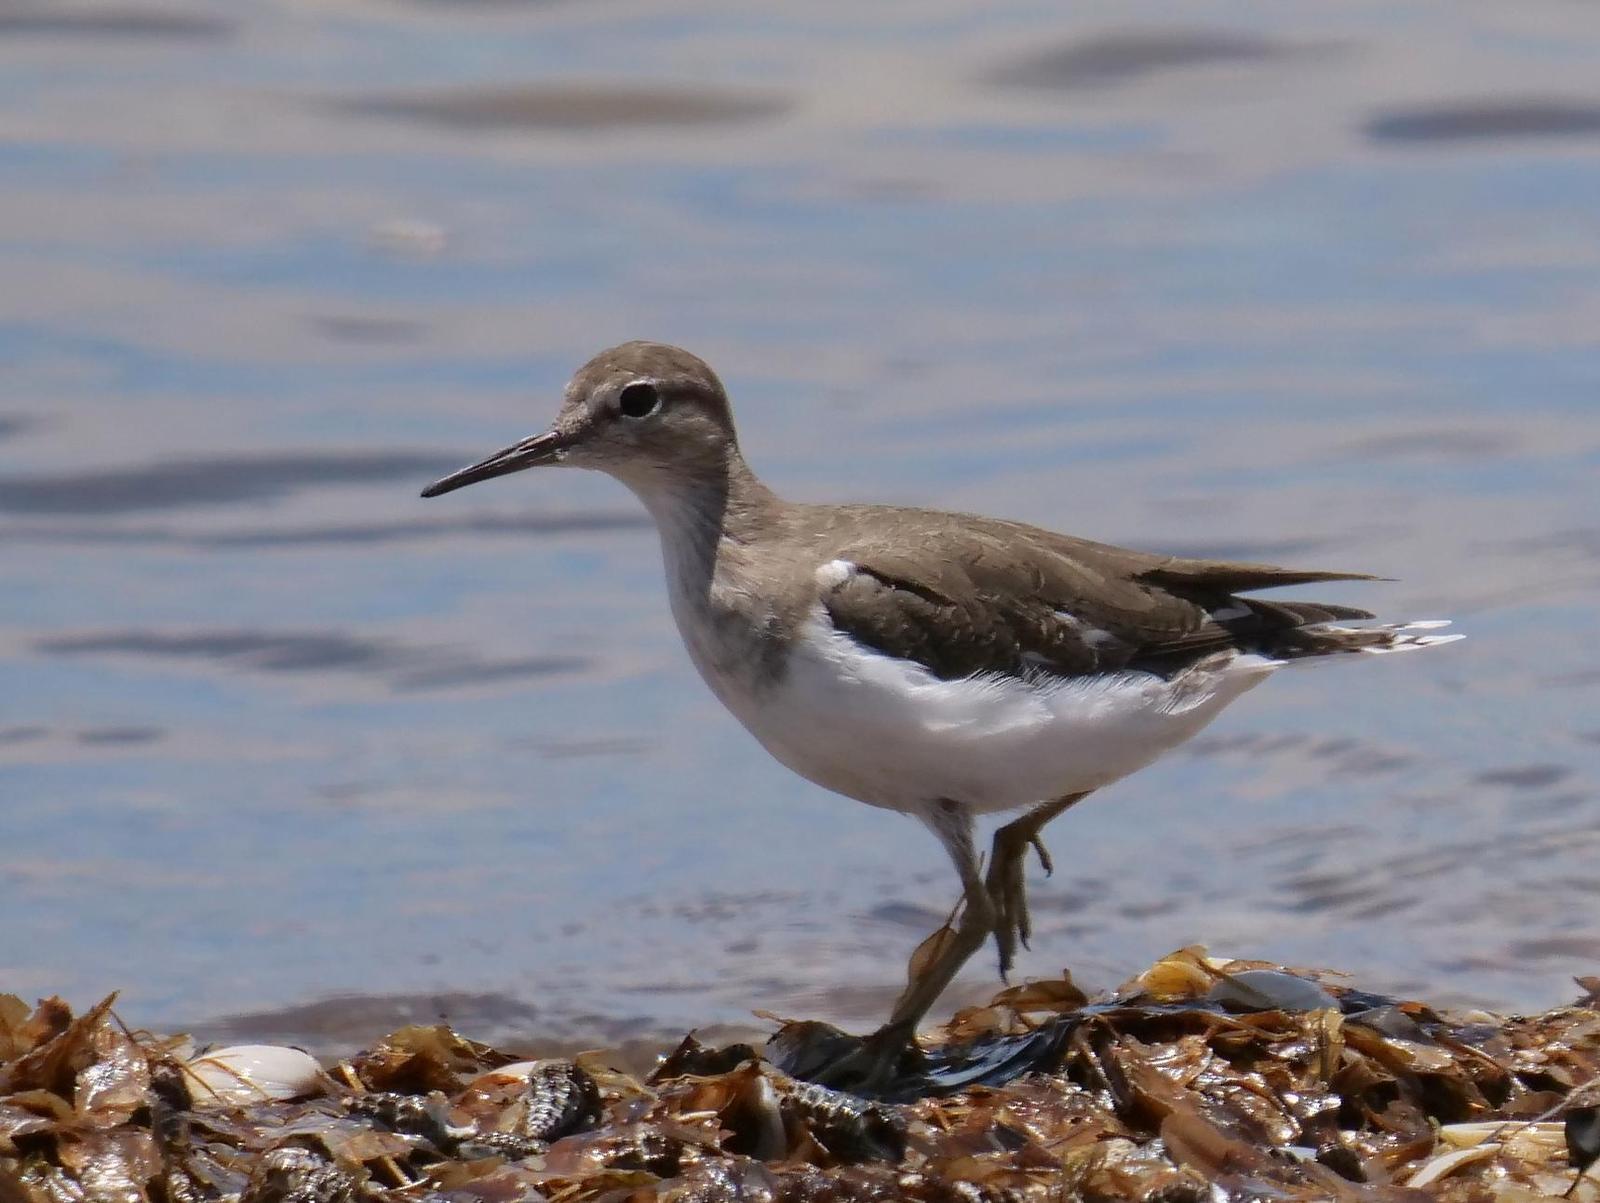 Common Sandpiper Photo by Peter Lowe